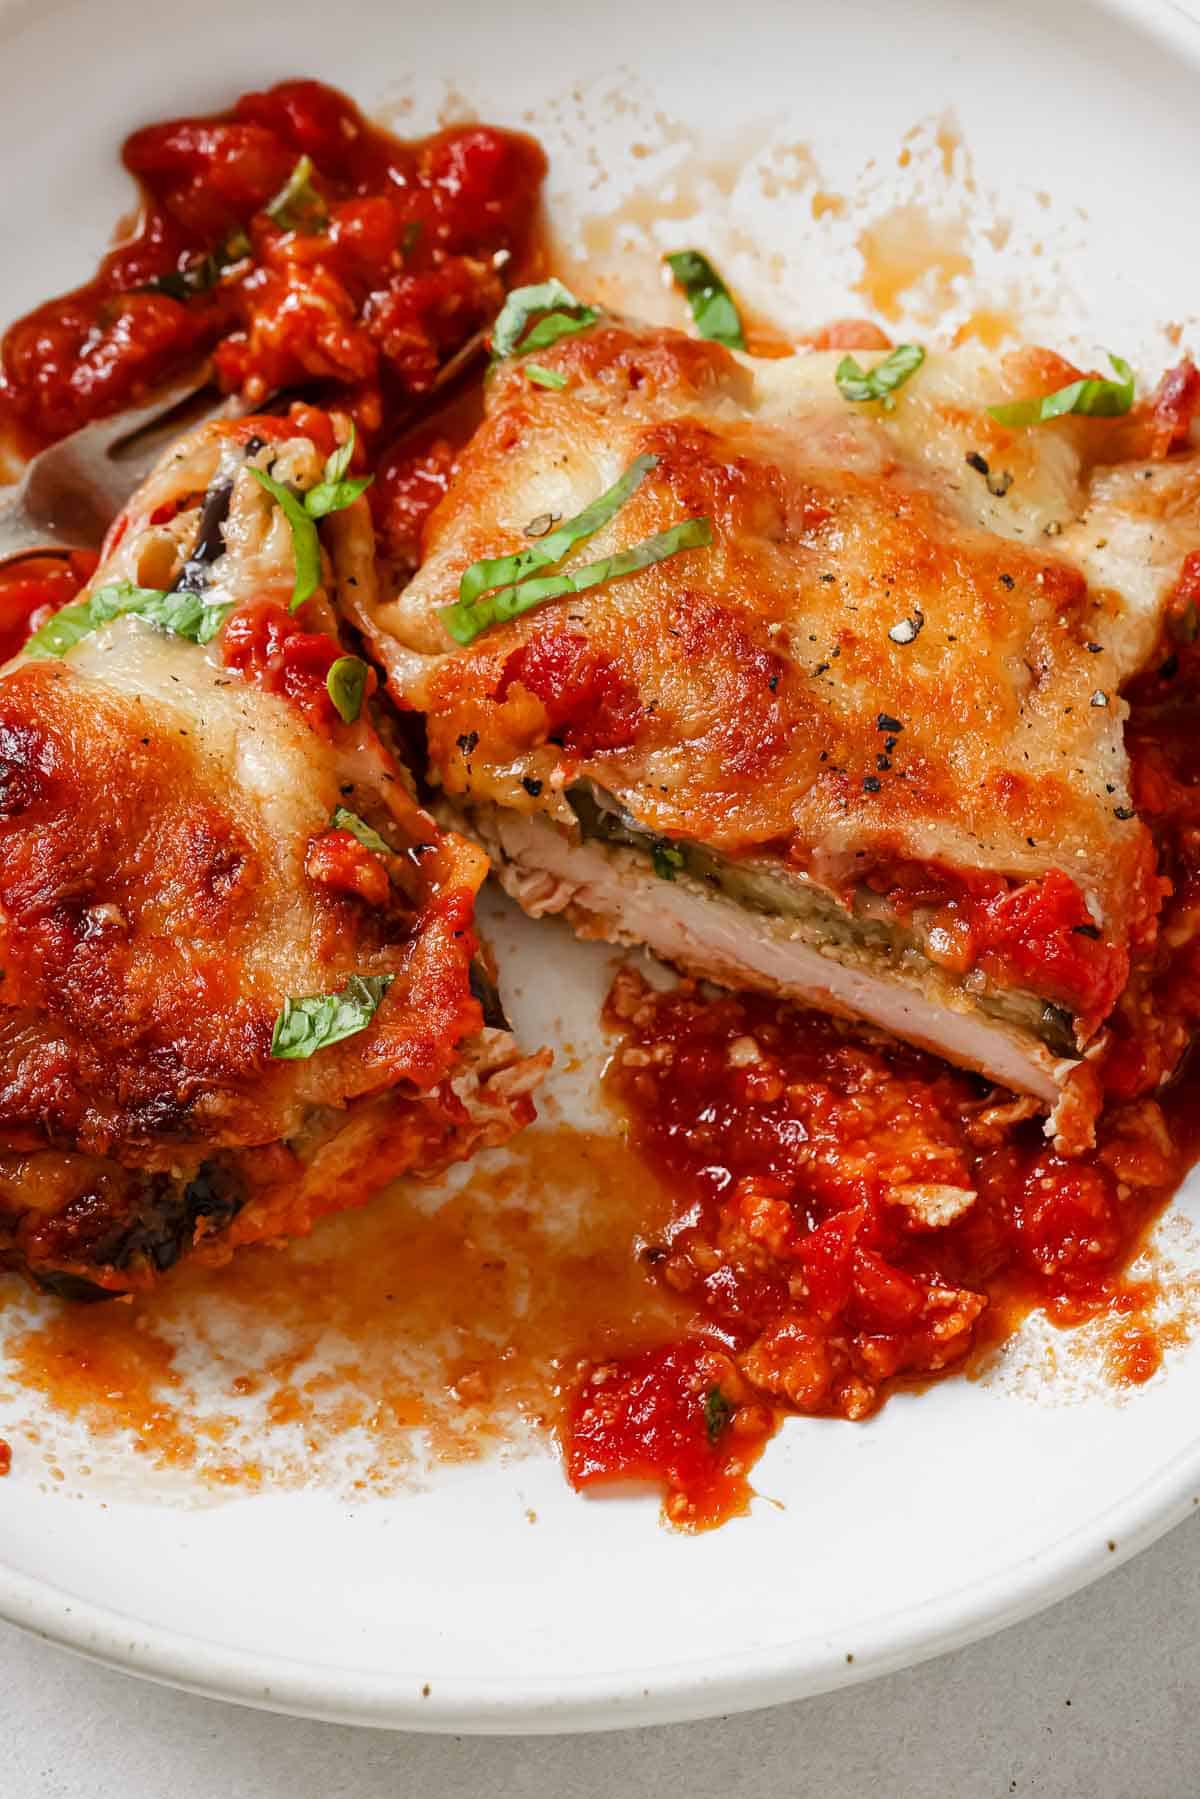 Chicken Sorrentino cut in half on a plate with extra sauce.